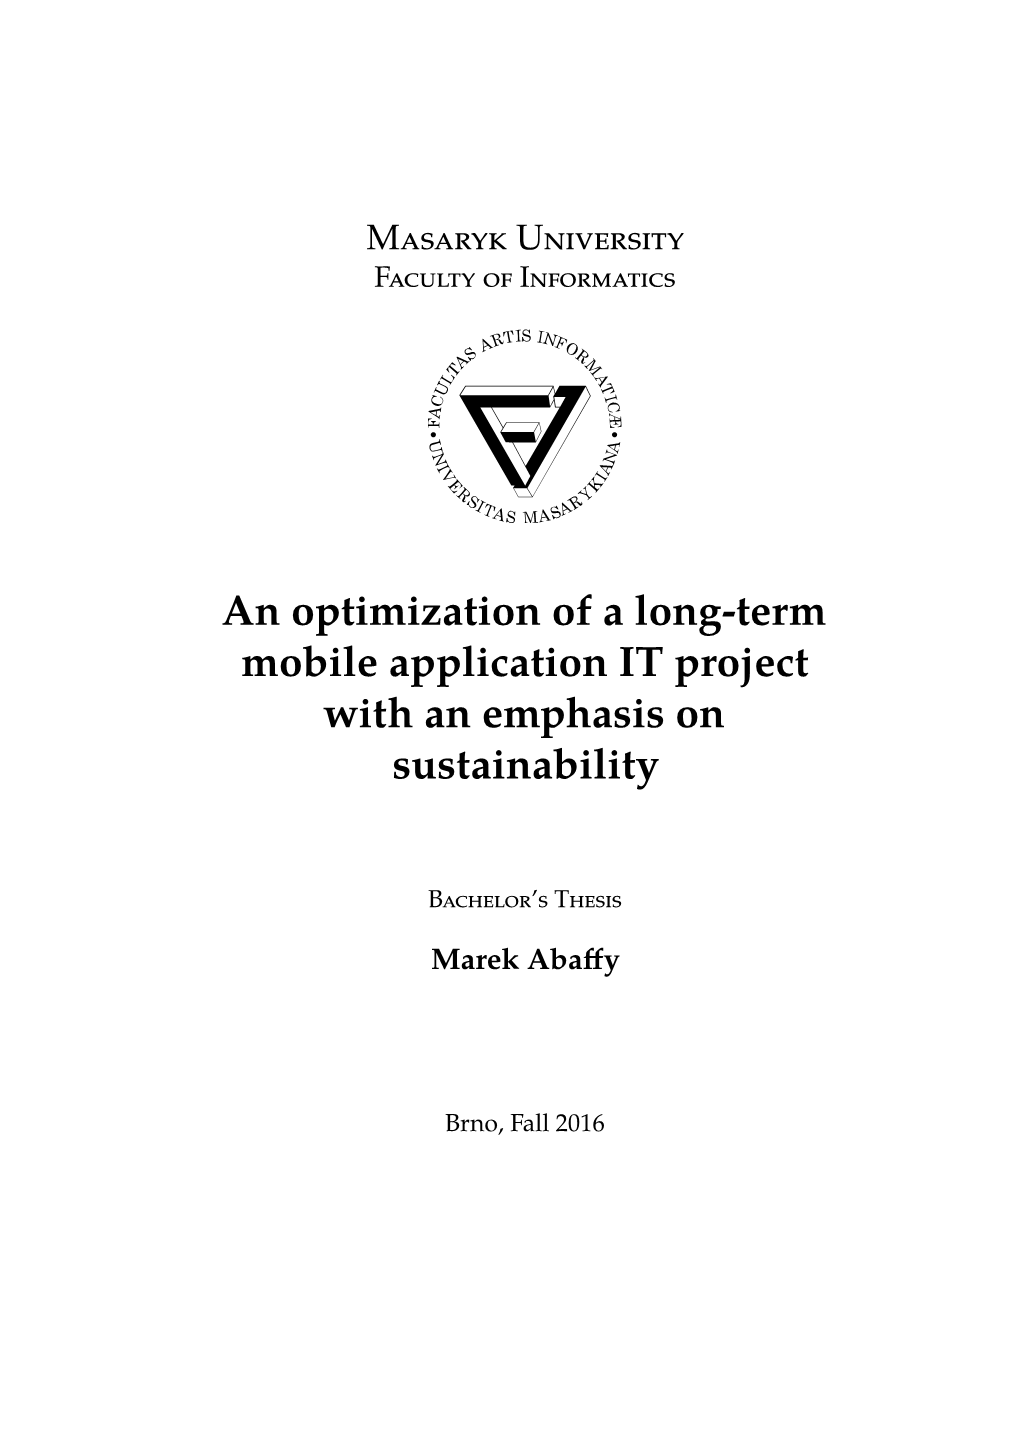 An Optimization of a Long-Term Mobile Application IT Project with an Emphasis on Sustainability